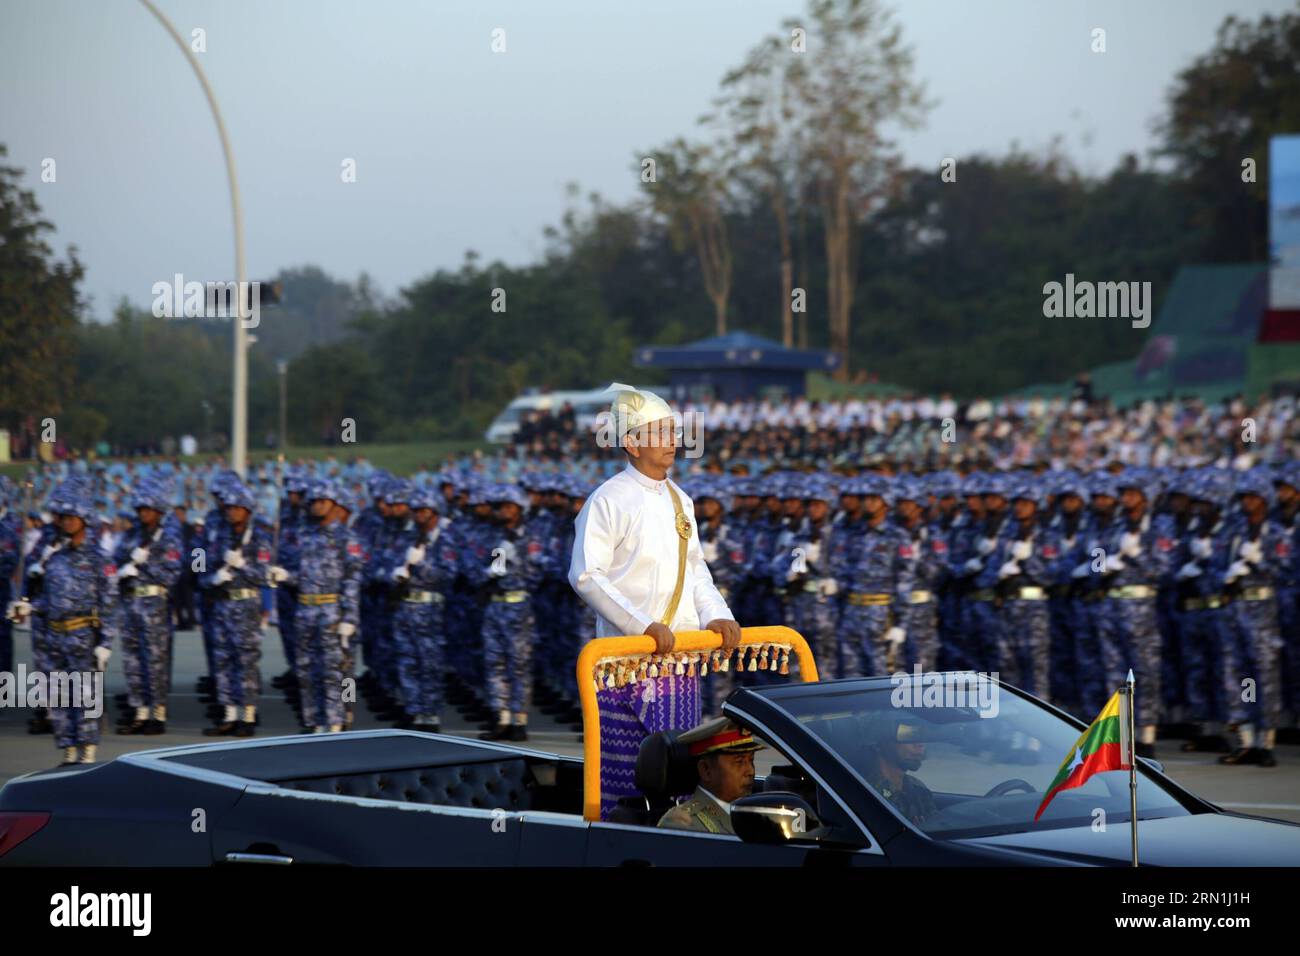 AKTUELLES ZEITGESCHEHEN Myanmar feiert Unabhängigkeitstag (150104) -- NAY PYI TAW, Jan. 4, 2015 -- Myanmar President U Thein Sein (C) stands on vehicle as he inspects soldiers during a ceremony to mark the 67th anniversary of Myanmar s Independence day in Nay Pyi Taw, Myanmar, Jan. 4, 2015. Myanmar resumed military parade and mass procession Sunday to celebrate the country s Independence Day for the first time in over five decades since the end of 1950s. ) MYANMAR-NAY PYI TAW-INDEPENDENCE DAY UxAung PUBLICATIONxNOTxINxCHN   News Current events Myanmar celebrate Independence Day  Nay Pyi Taw Ja Stock Photo